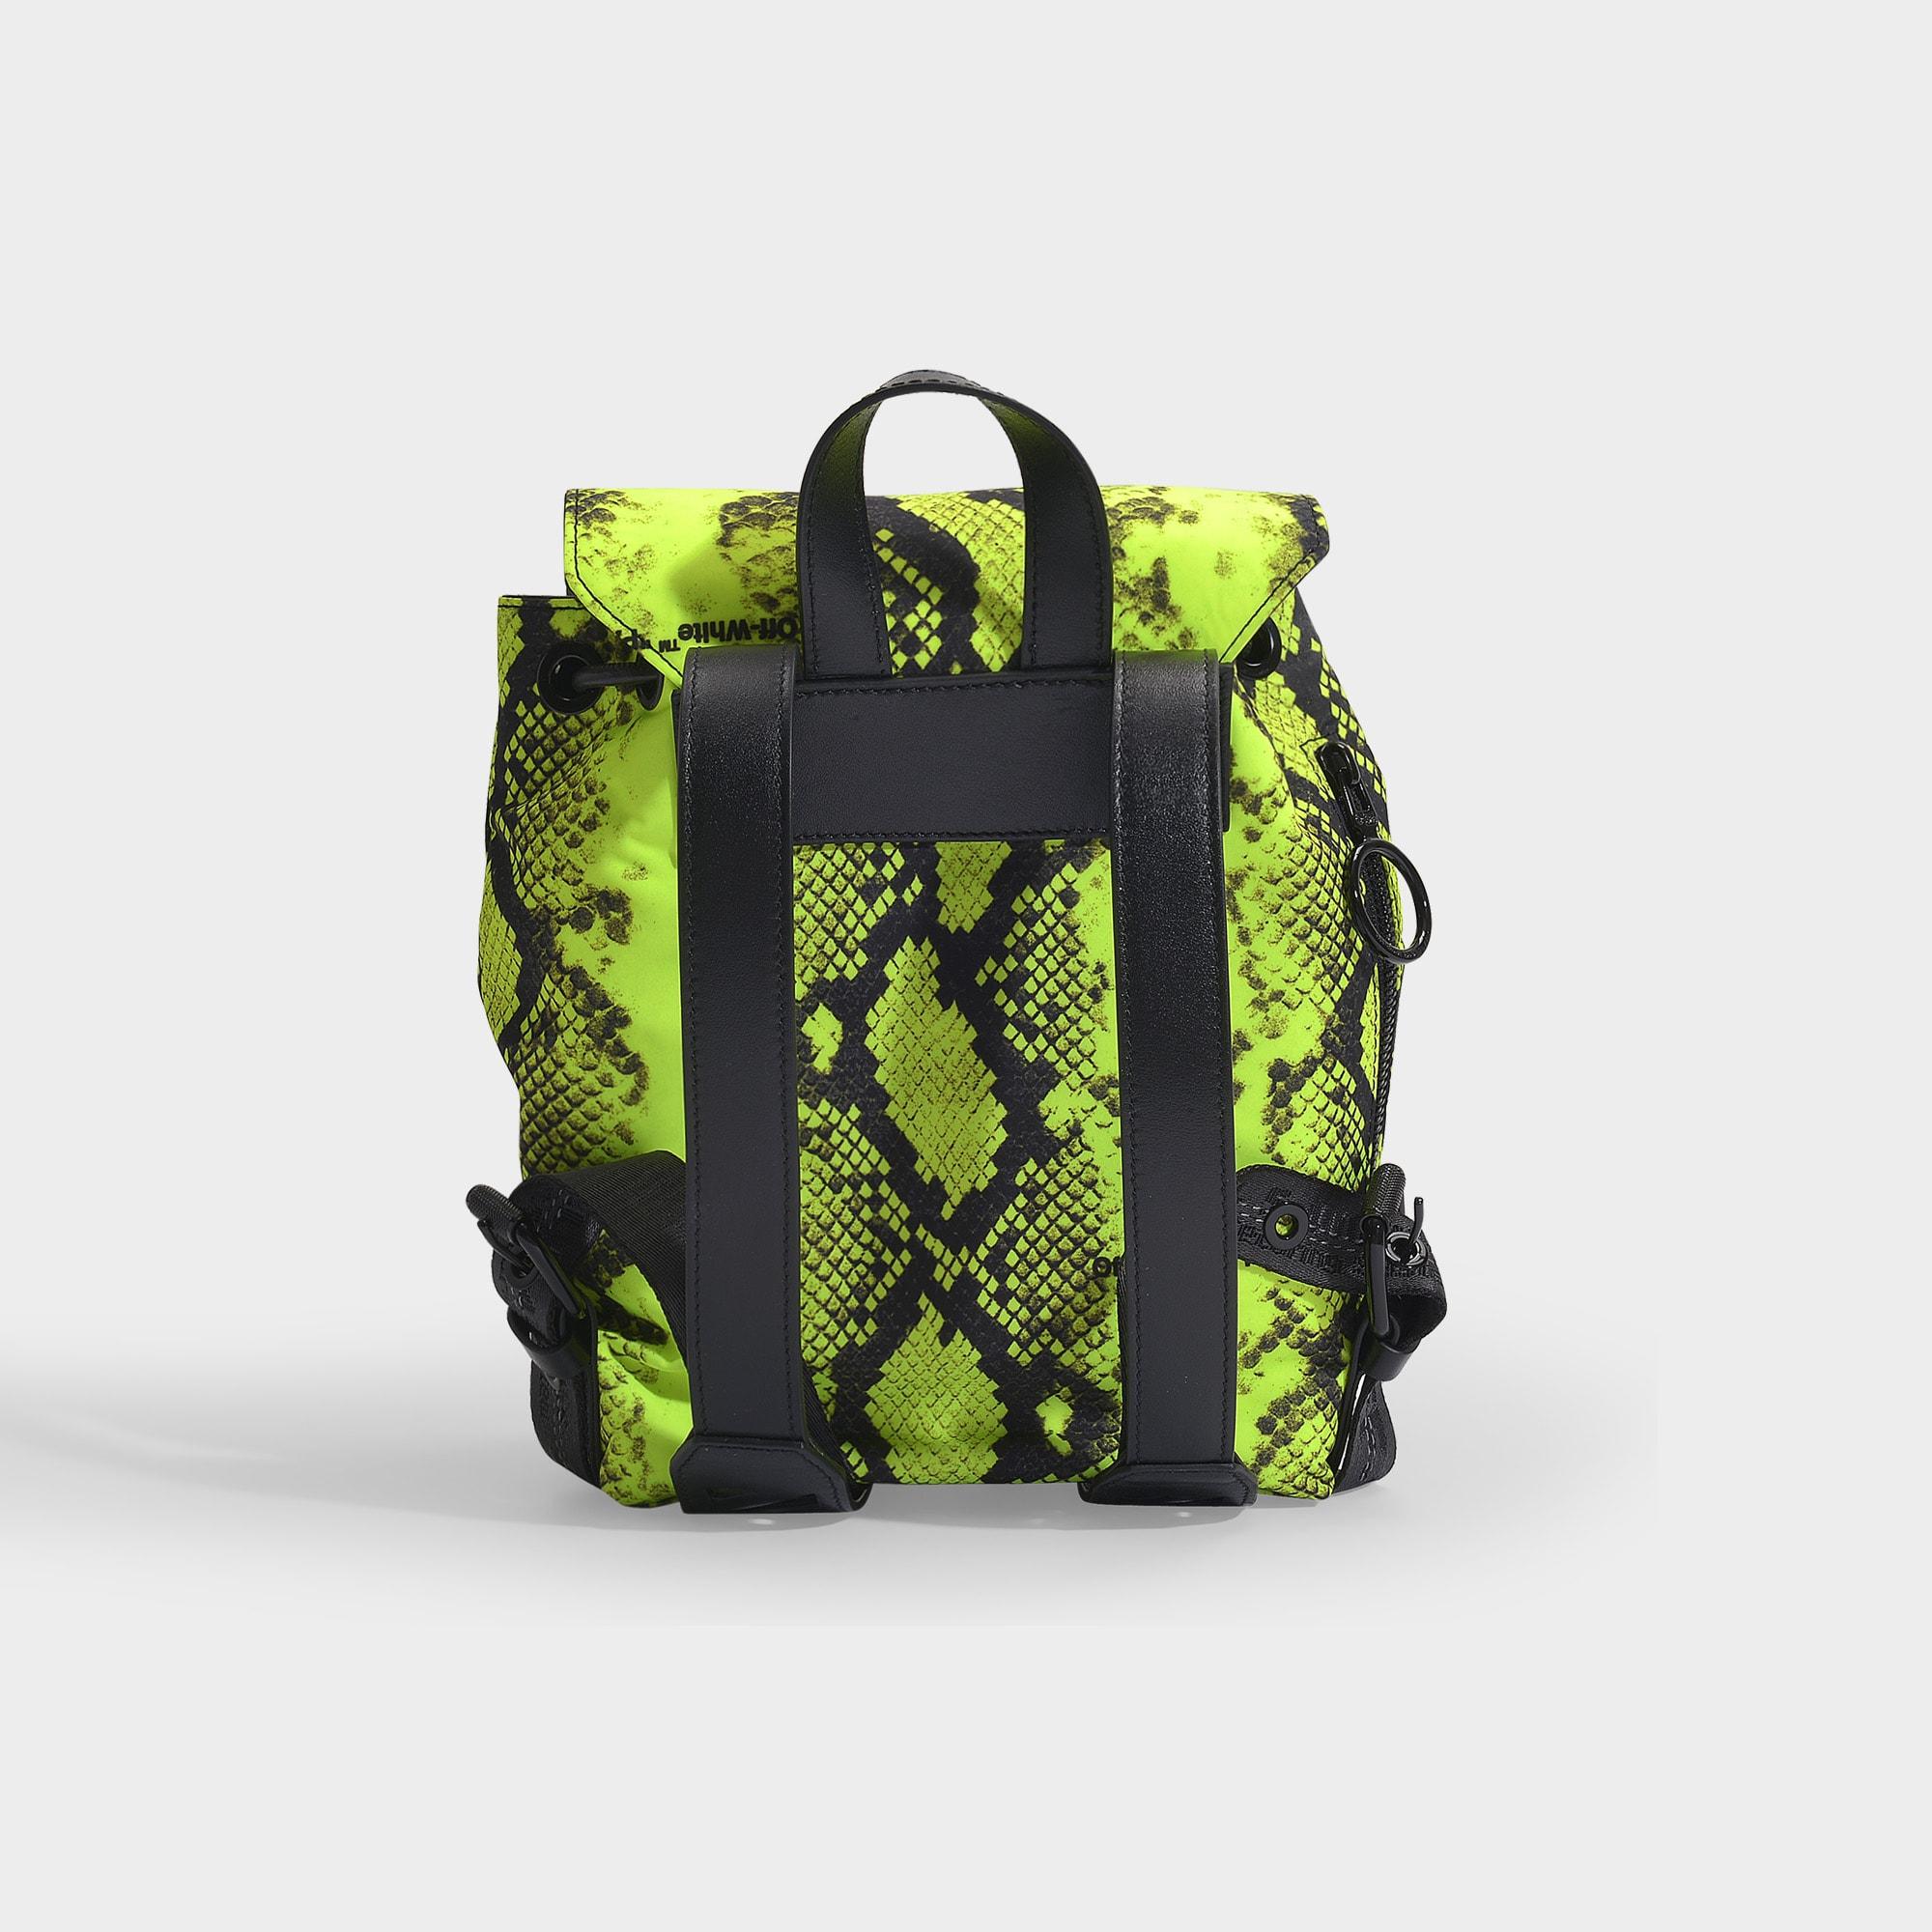 Off-White c/o Virgil Abloh Python Mini Backpack In Neon Yellow Python Printed Leather - Lyst